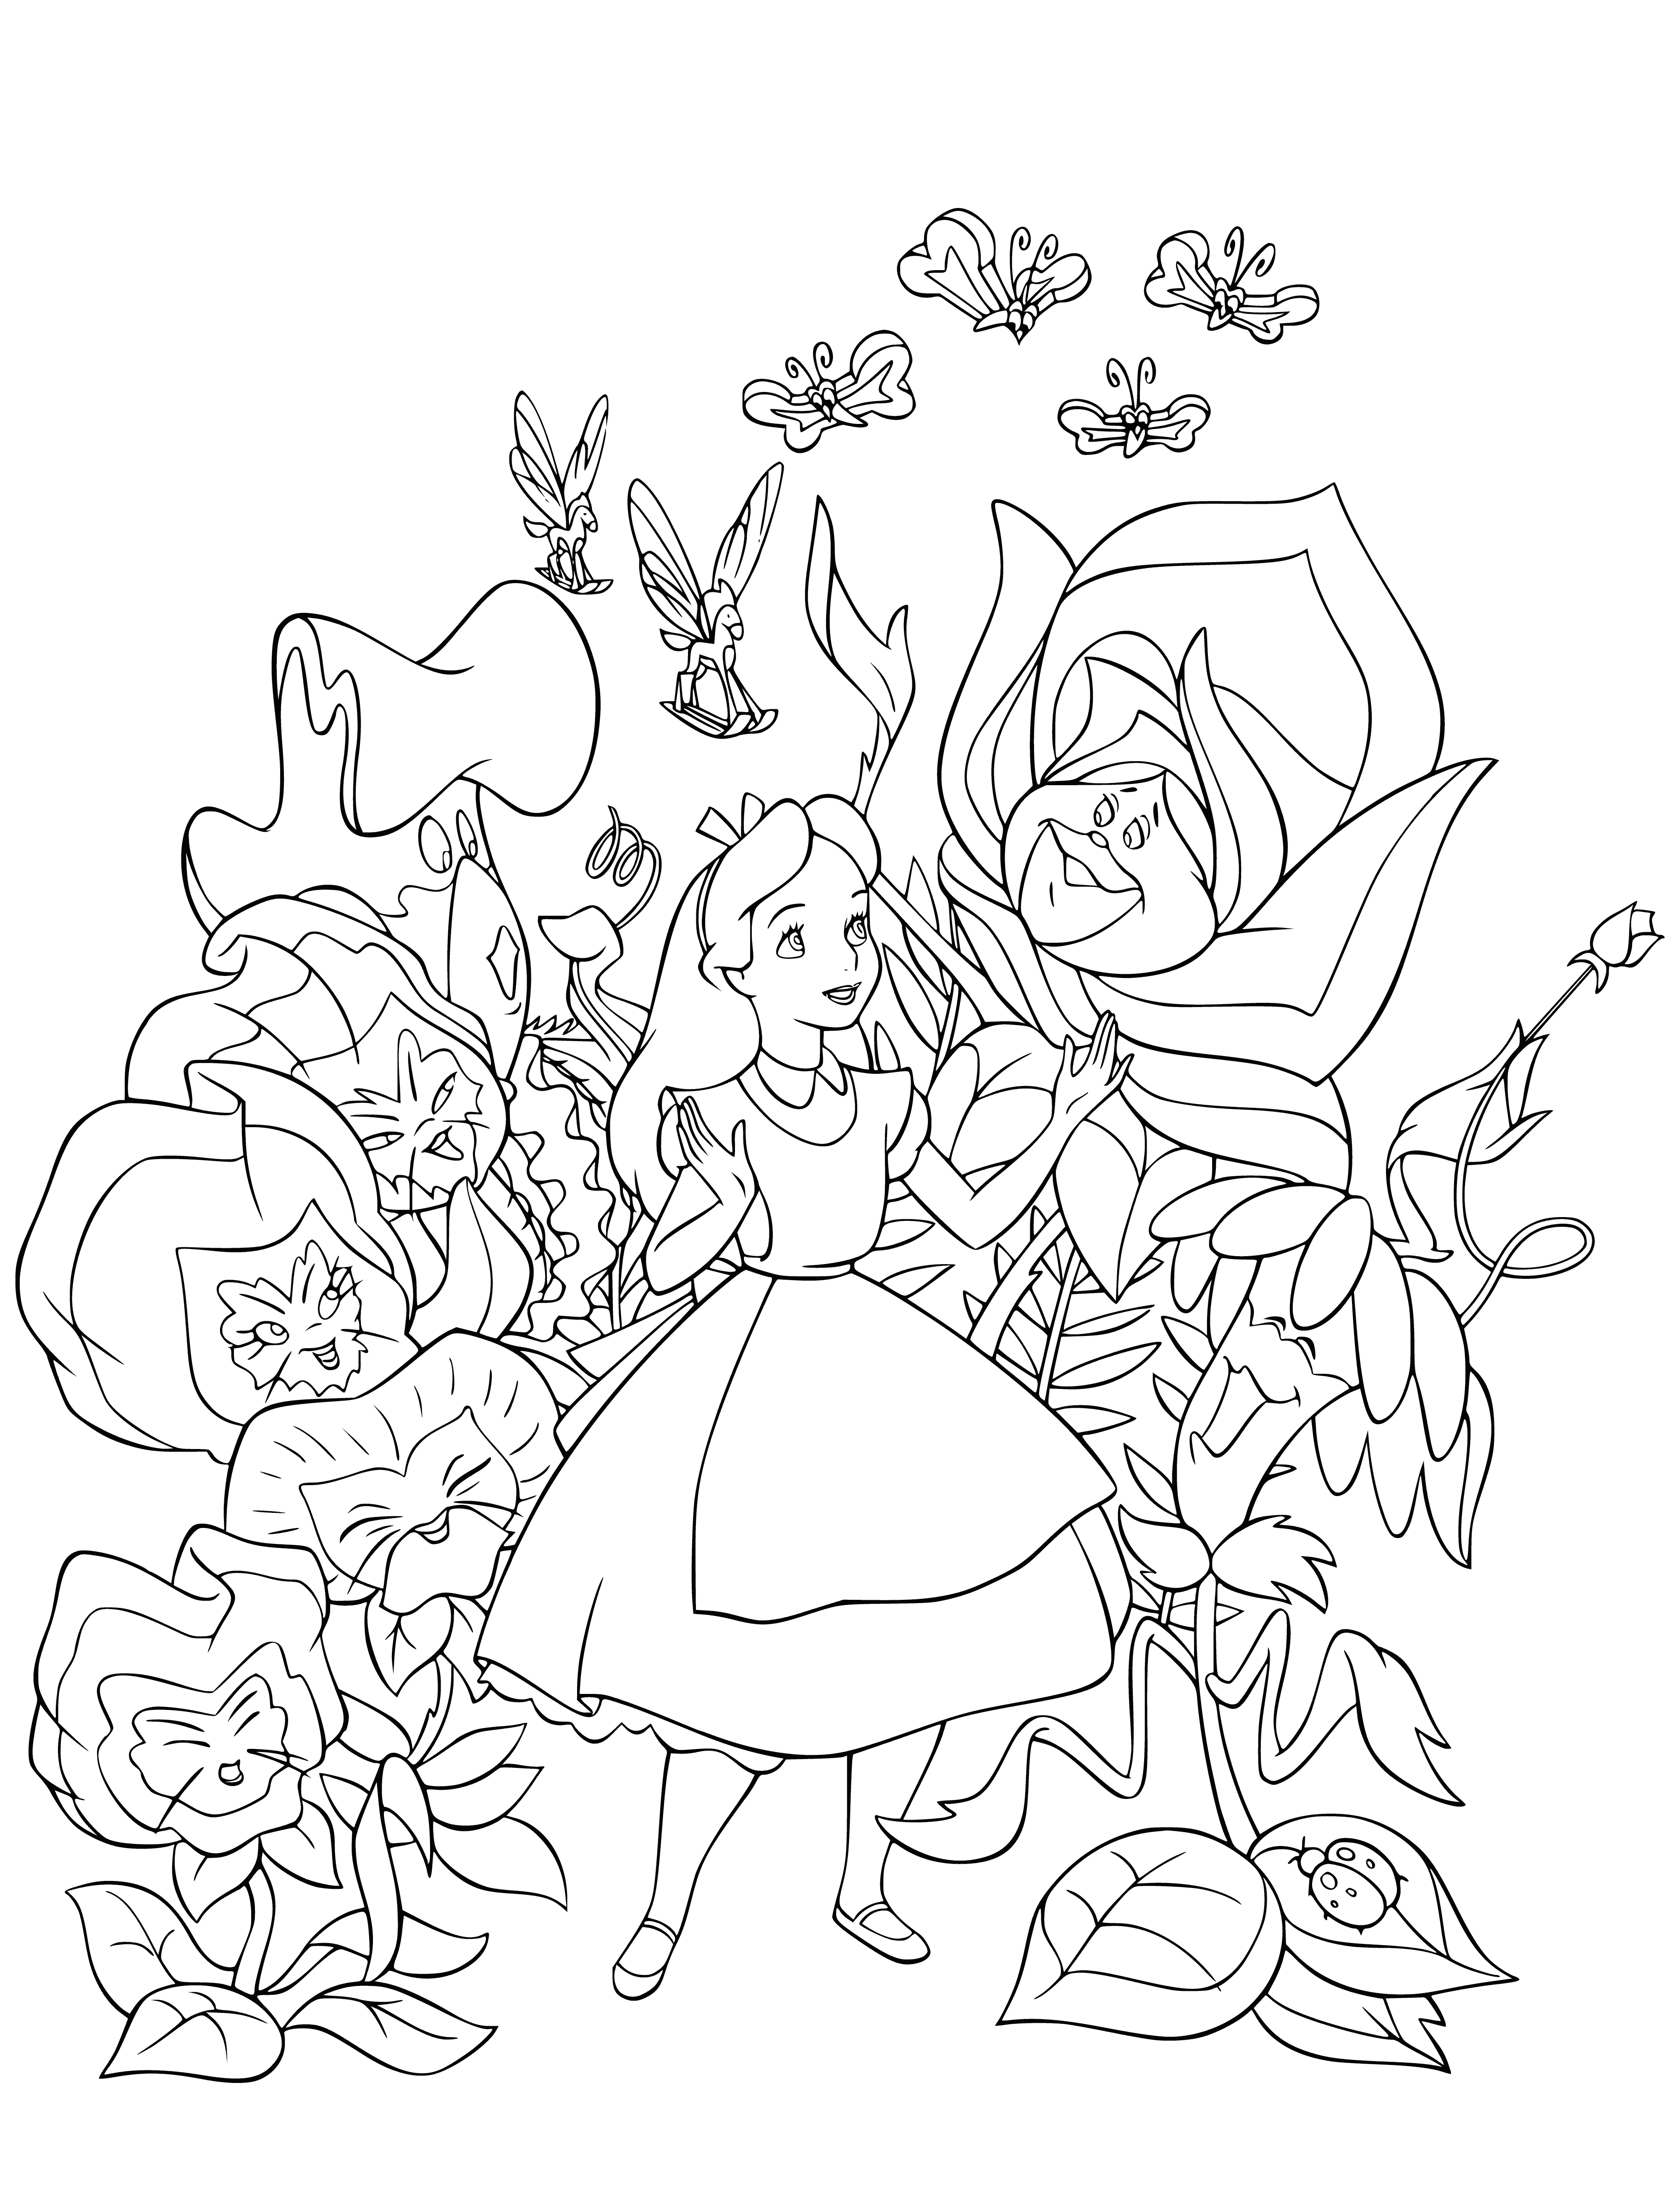 Wonderful garden coloring page